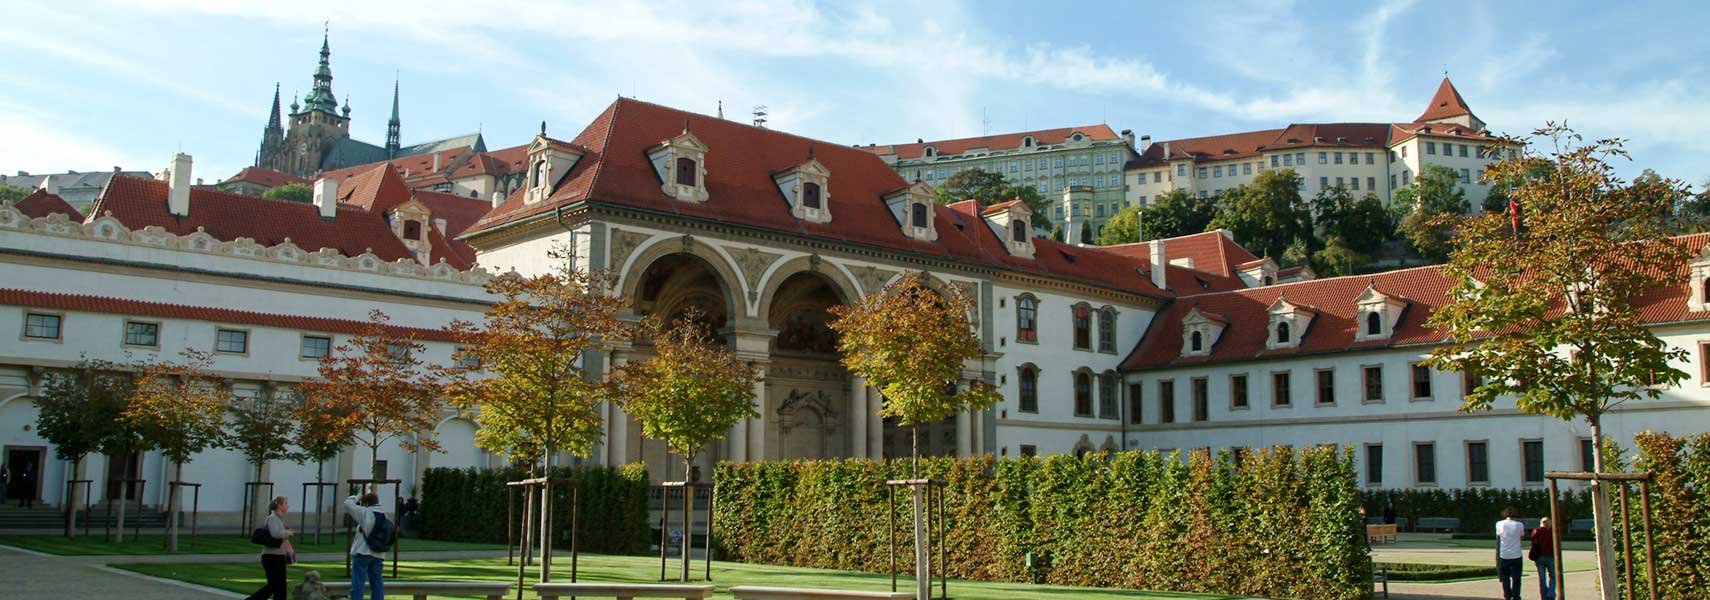 Wallenstein Palace, a Baroque palace in Prague